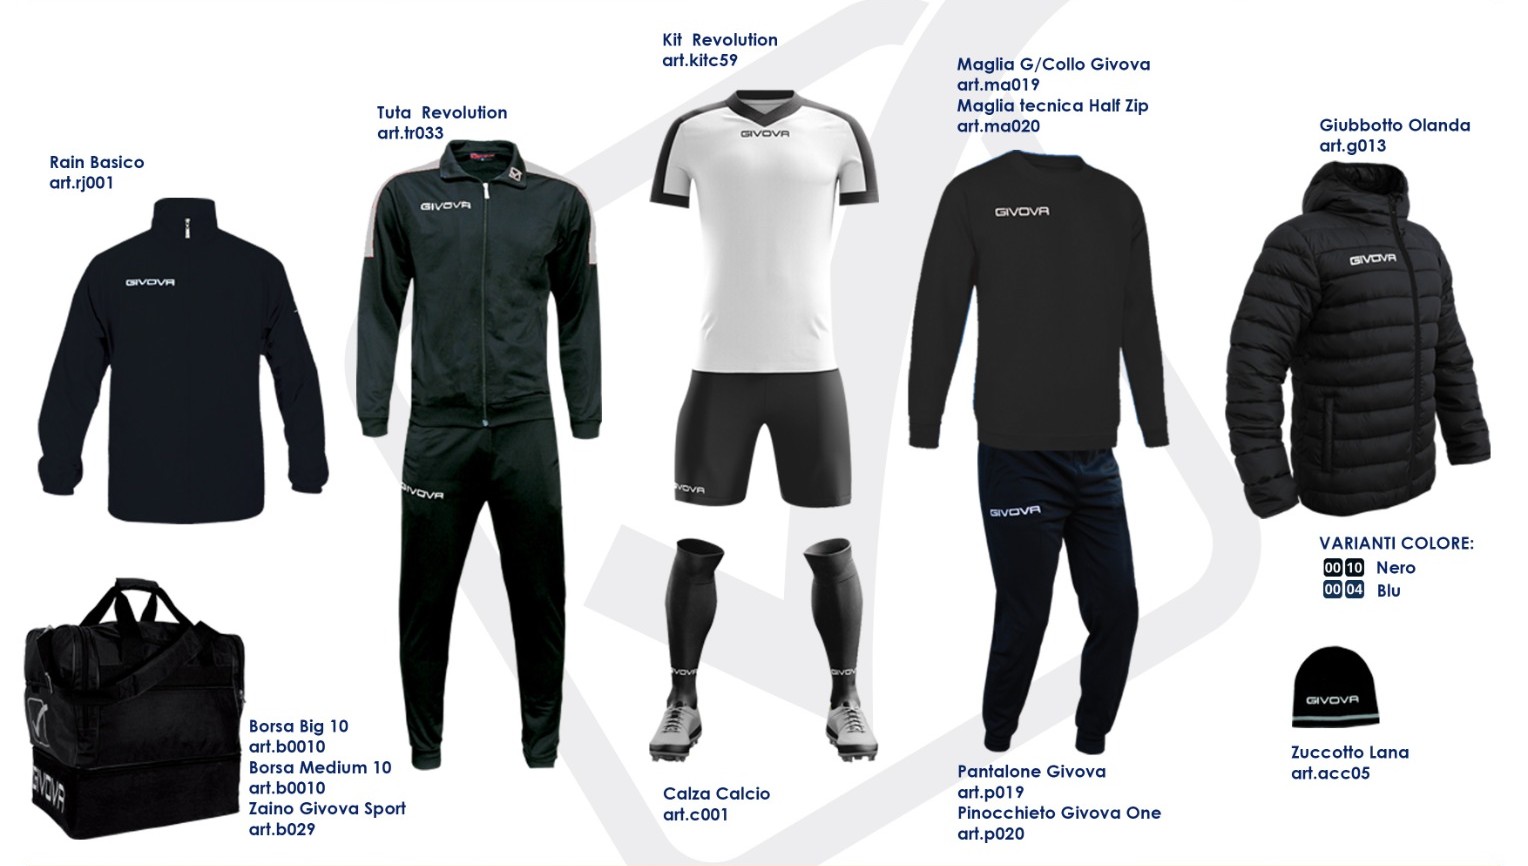 Kit entrainement foot, pack football club et particulier - Click For Foot